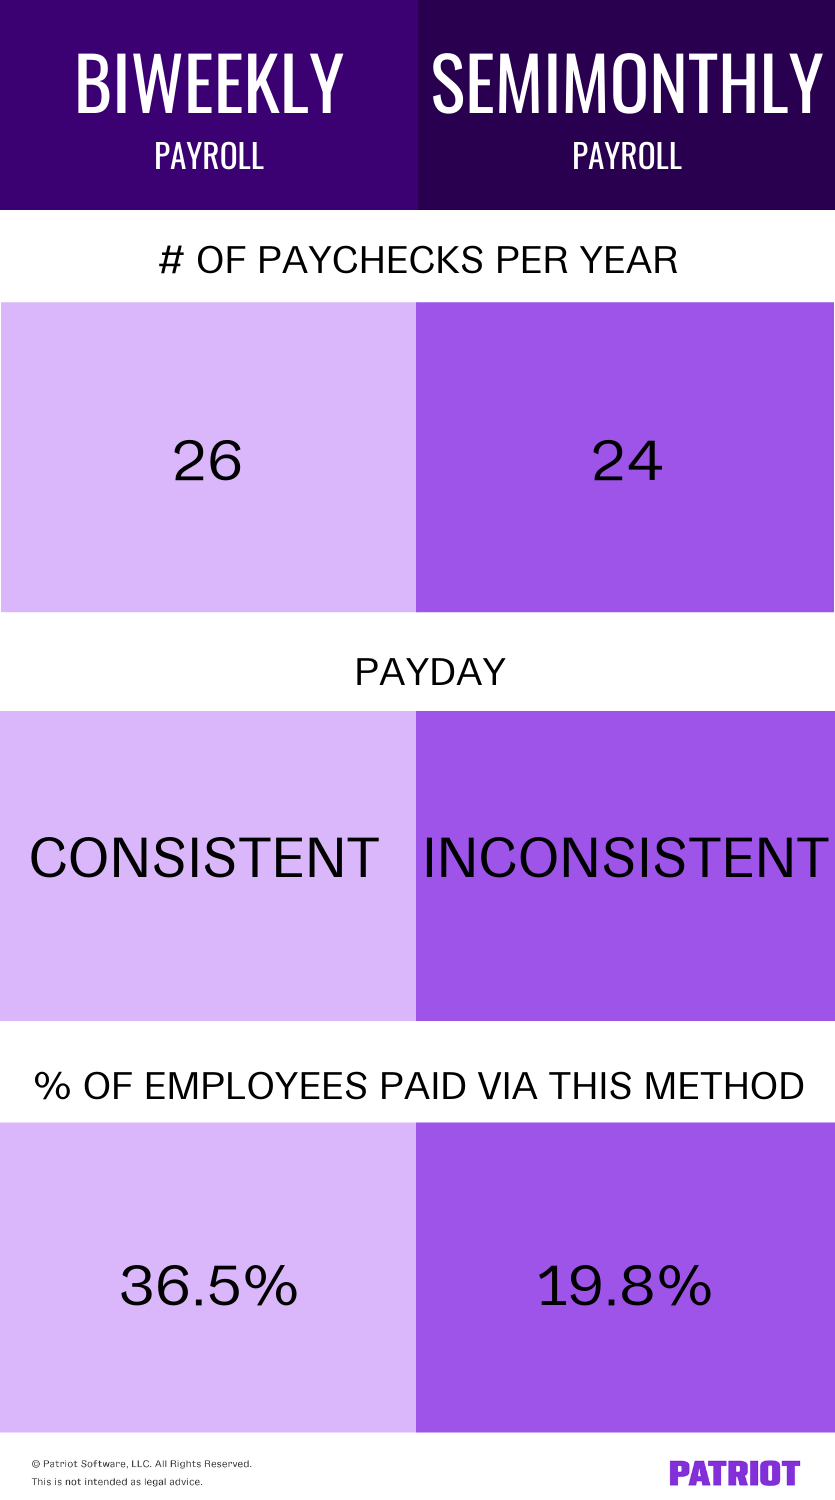 biweekly vs. semimonthly payroll: # of paychecks per year, payday, and % of employees paid via these methods comparison chart